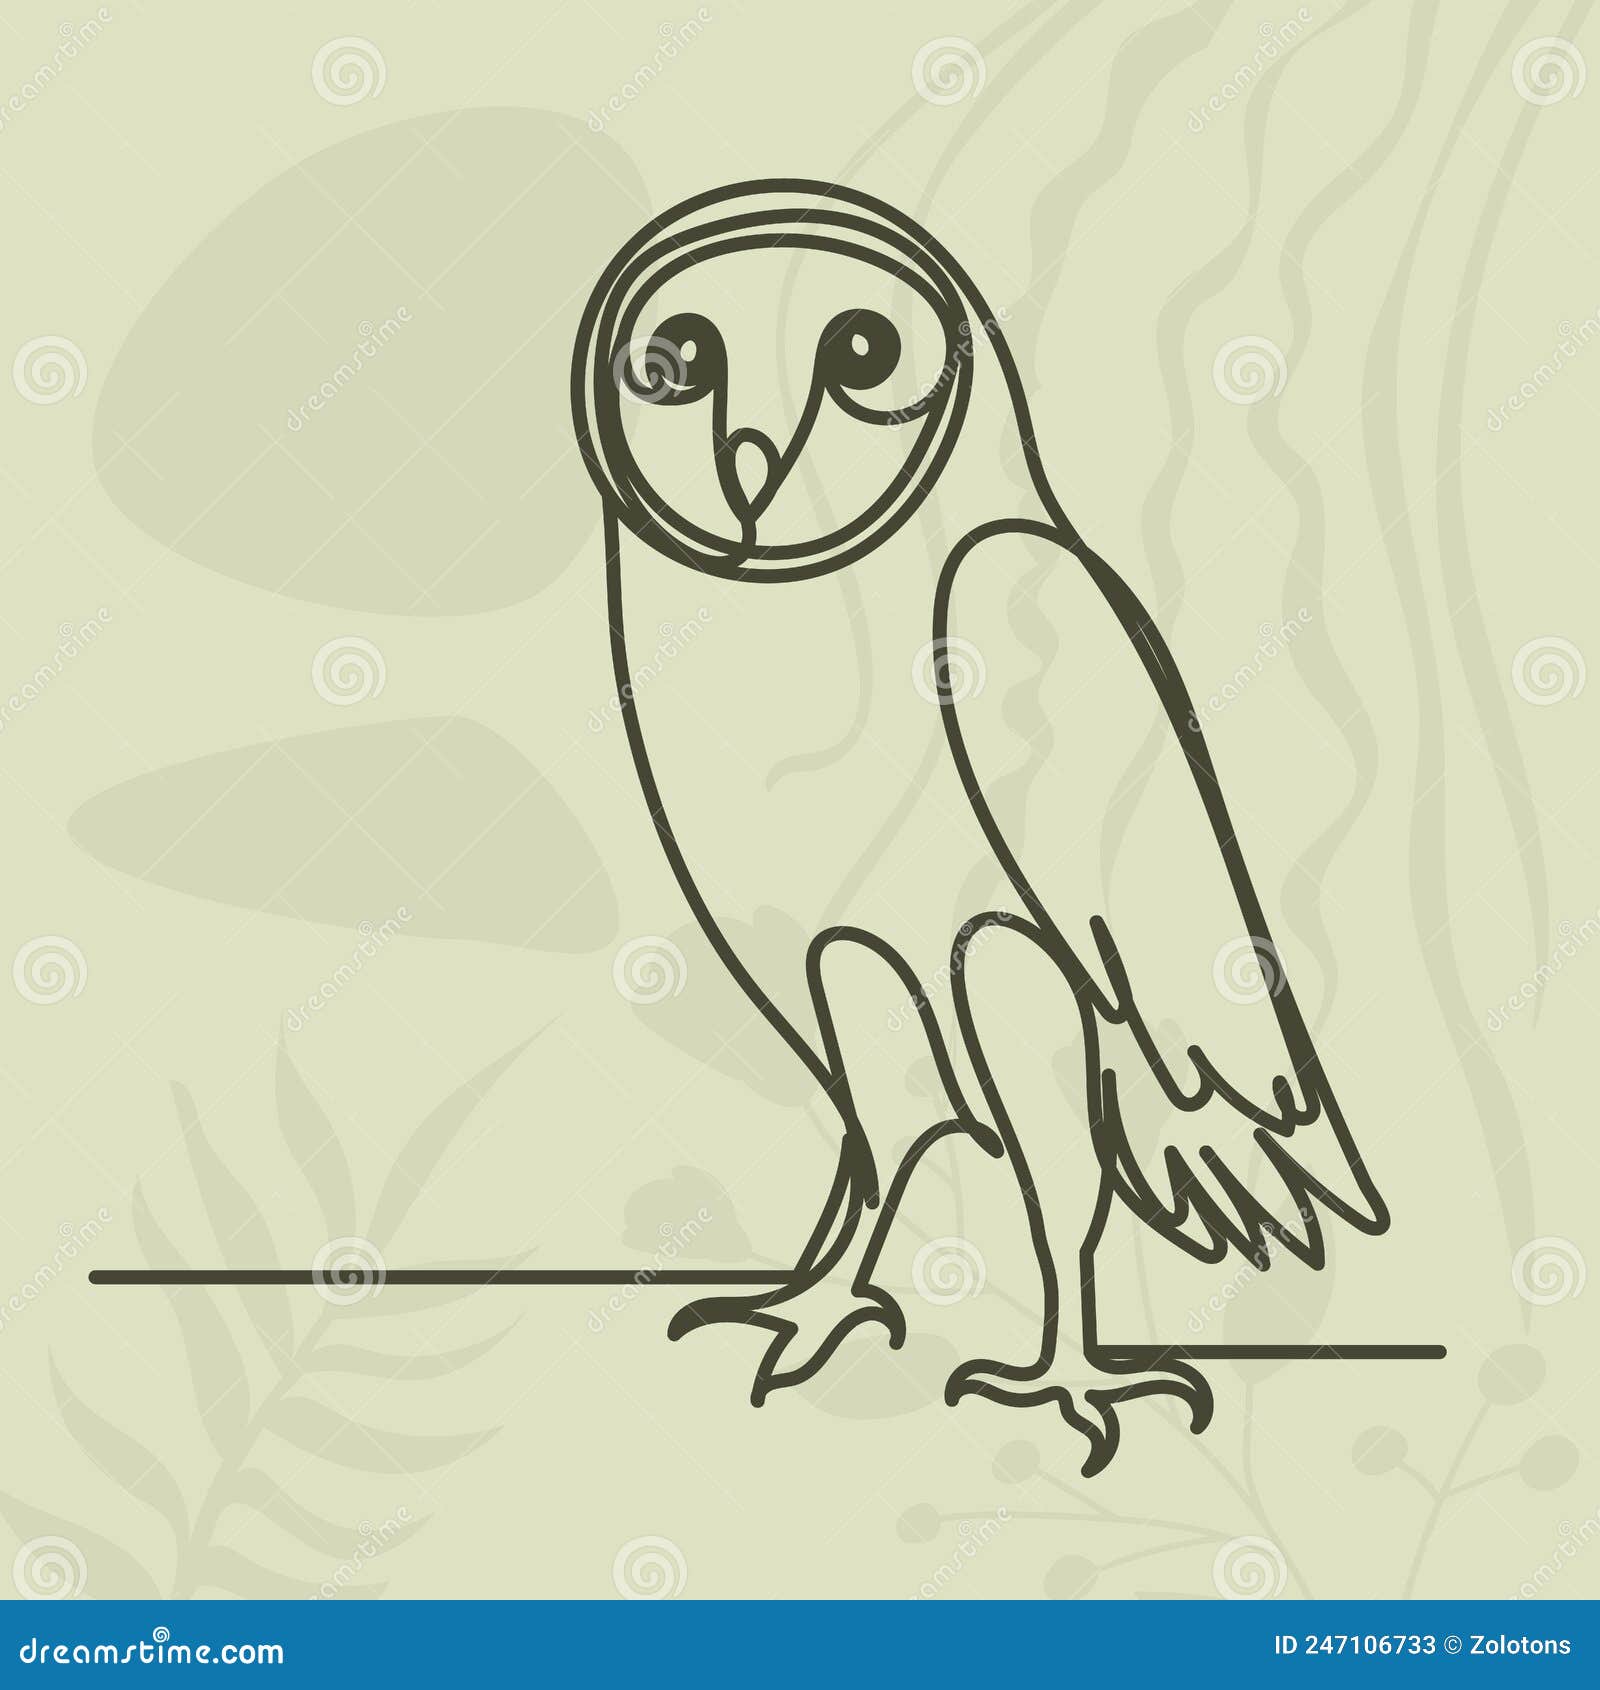 How to Draw an Owl with Pen and Ink